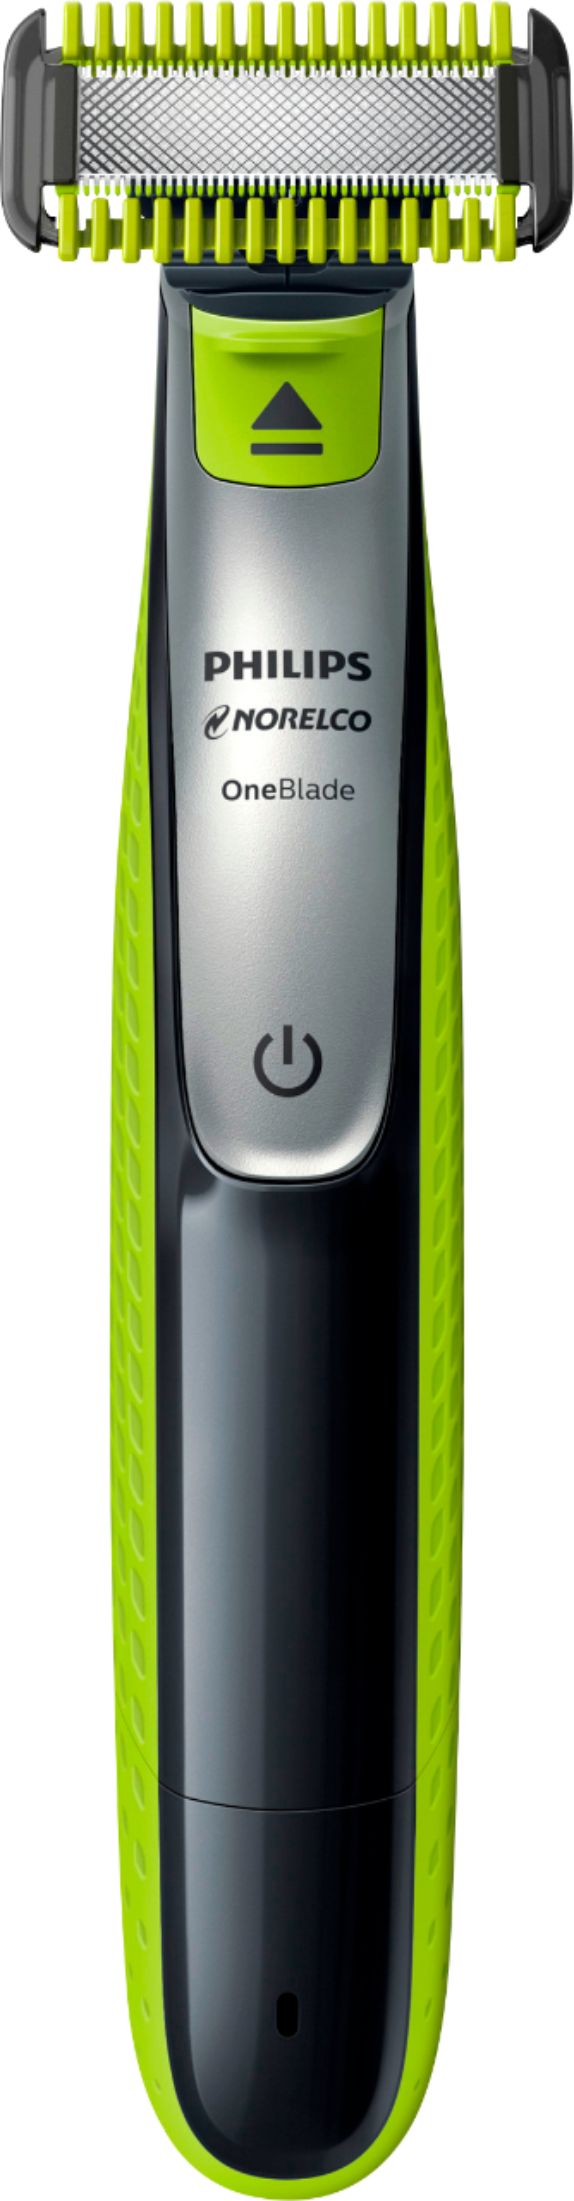 excentrisk Illusion lade Philips Norelco OneBlade Face + Body hybrid electric trimmer and shaver,  QP2630/70 Black, Green, Silver QP2630/70 - Best Buy